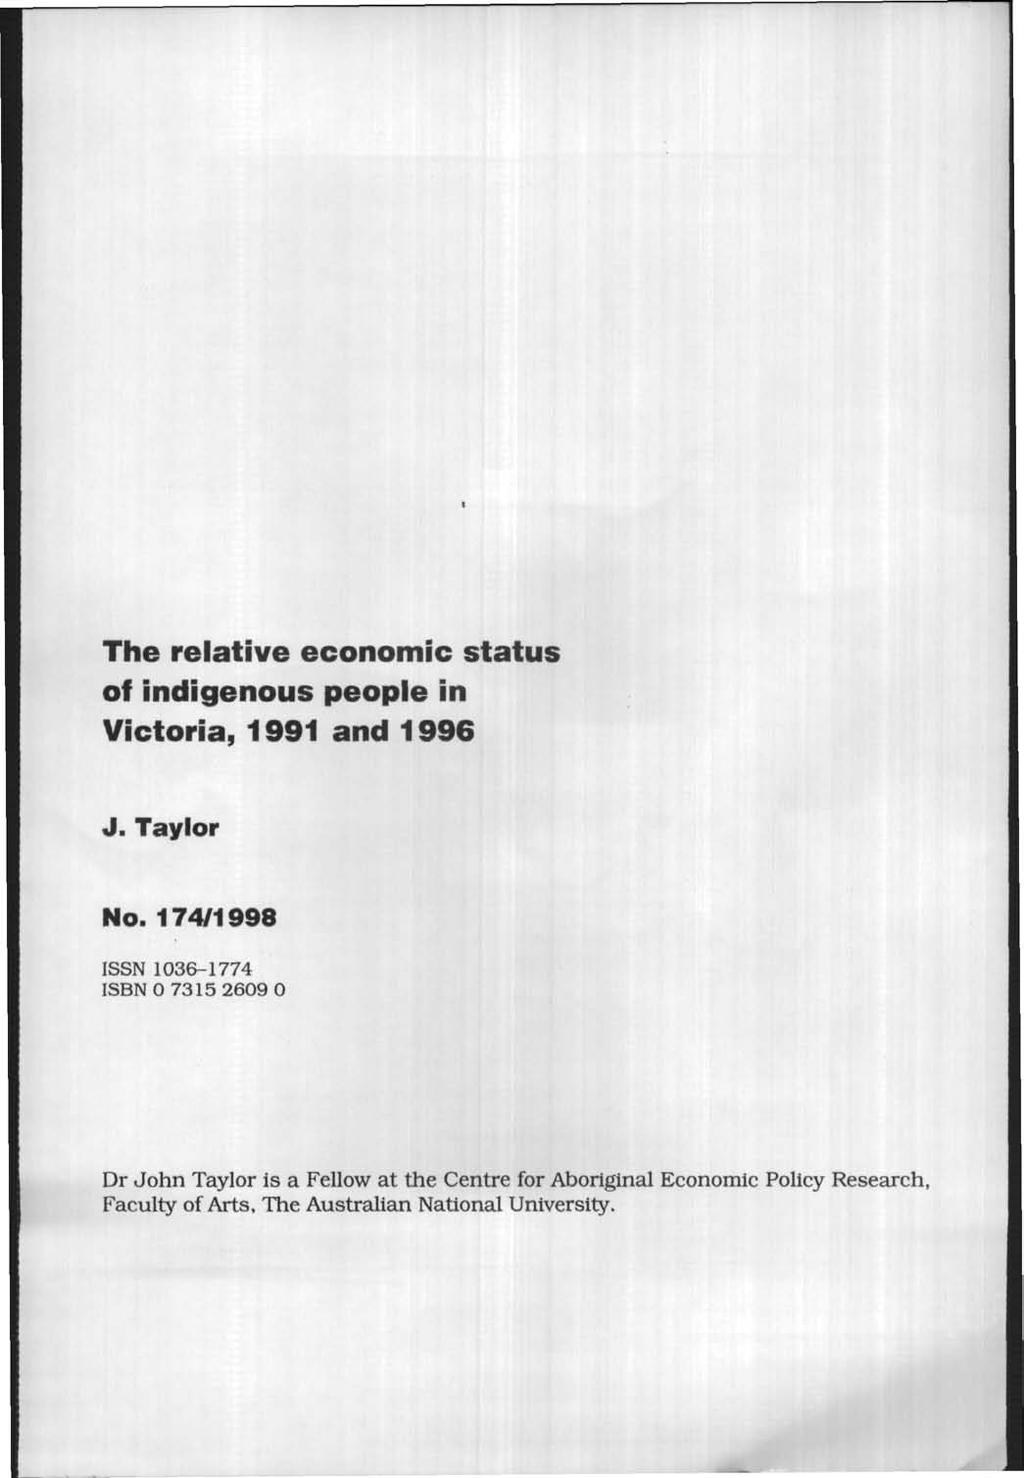 The relative economic status of indigenous people in Victoria, 1991 and 1996 J. Taylor No.